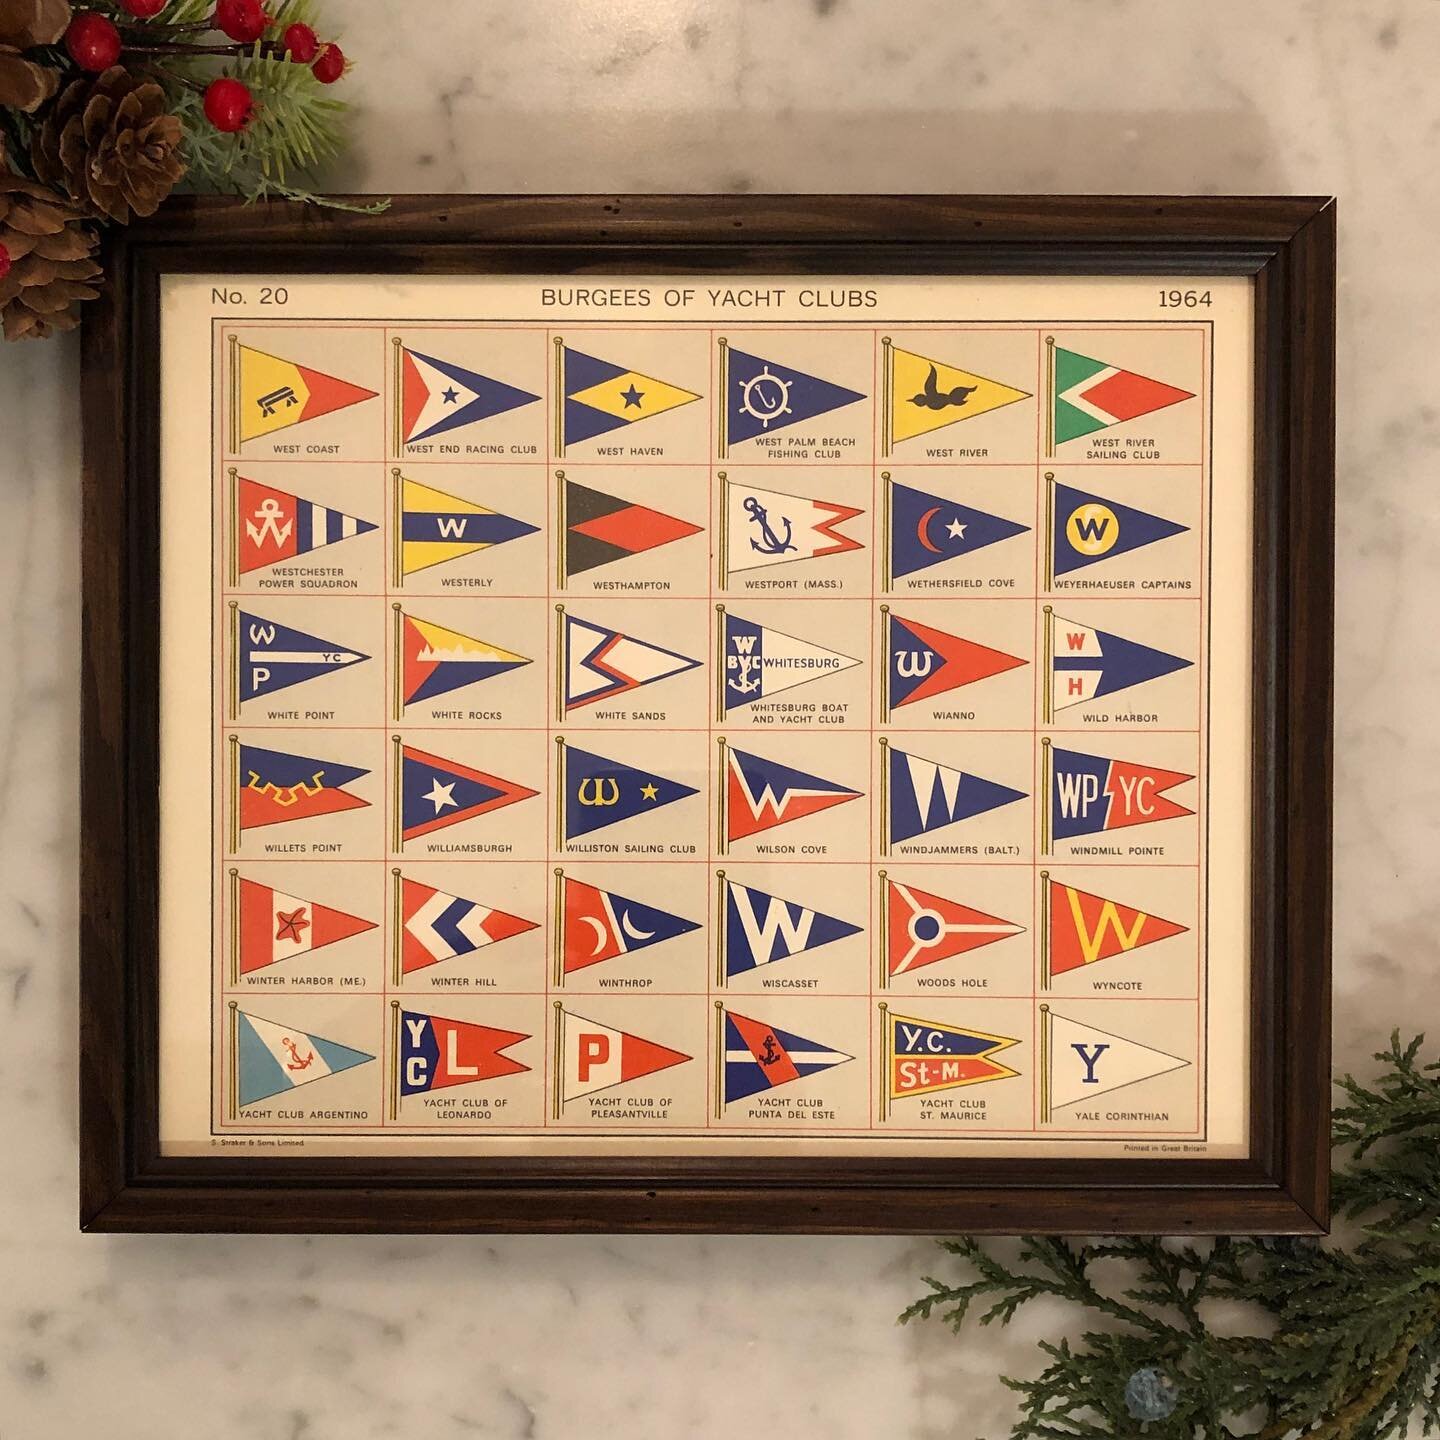 RESTOCK ALERT 🚨 New collection of vintage framed yacht club burgees arrived just in time for holiday gifting! Check them out on our site or in the shop.  #yachtclub #capecod #wianno #osterville #burgee #wiscasset #westerly #westport #woodshole